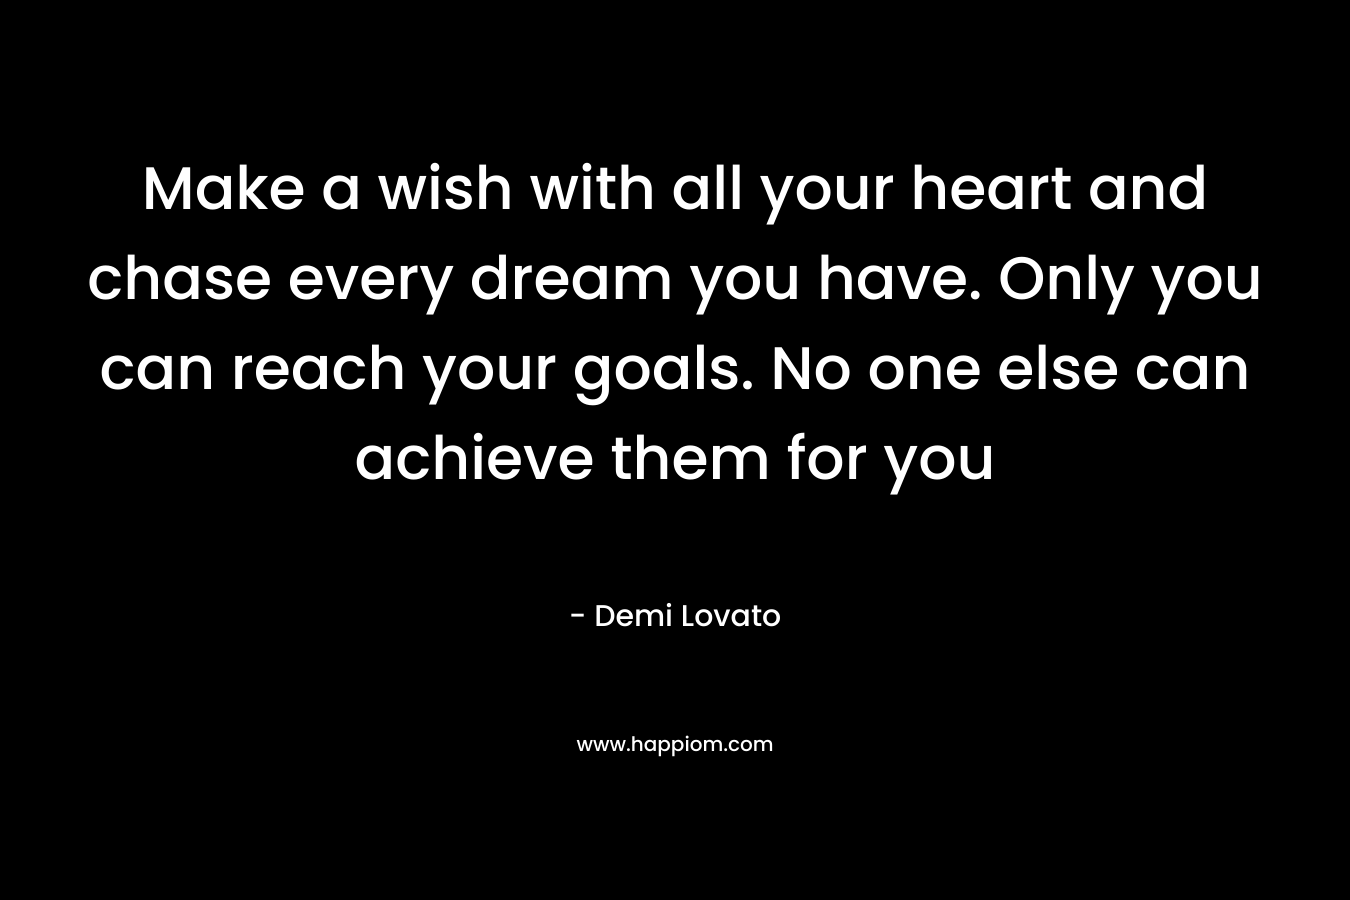 Make a wish with all your heart and chase every dream you have. Only you can reach your goals. No one else can achieve them for you – Demi Lovato